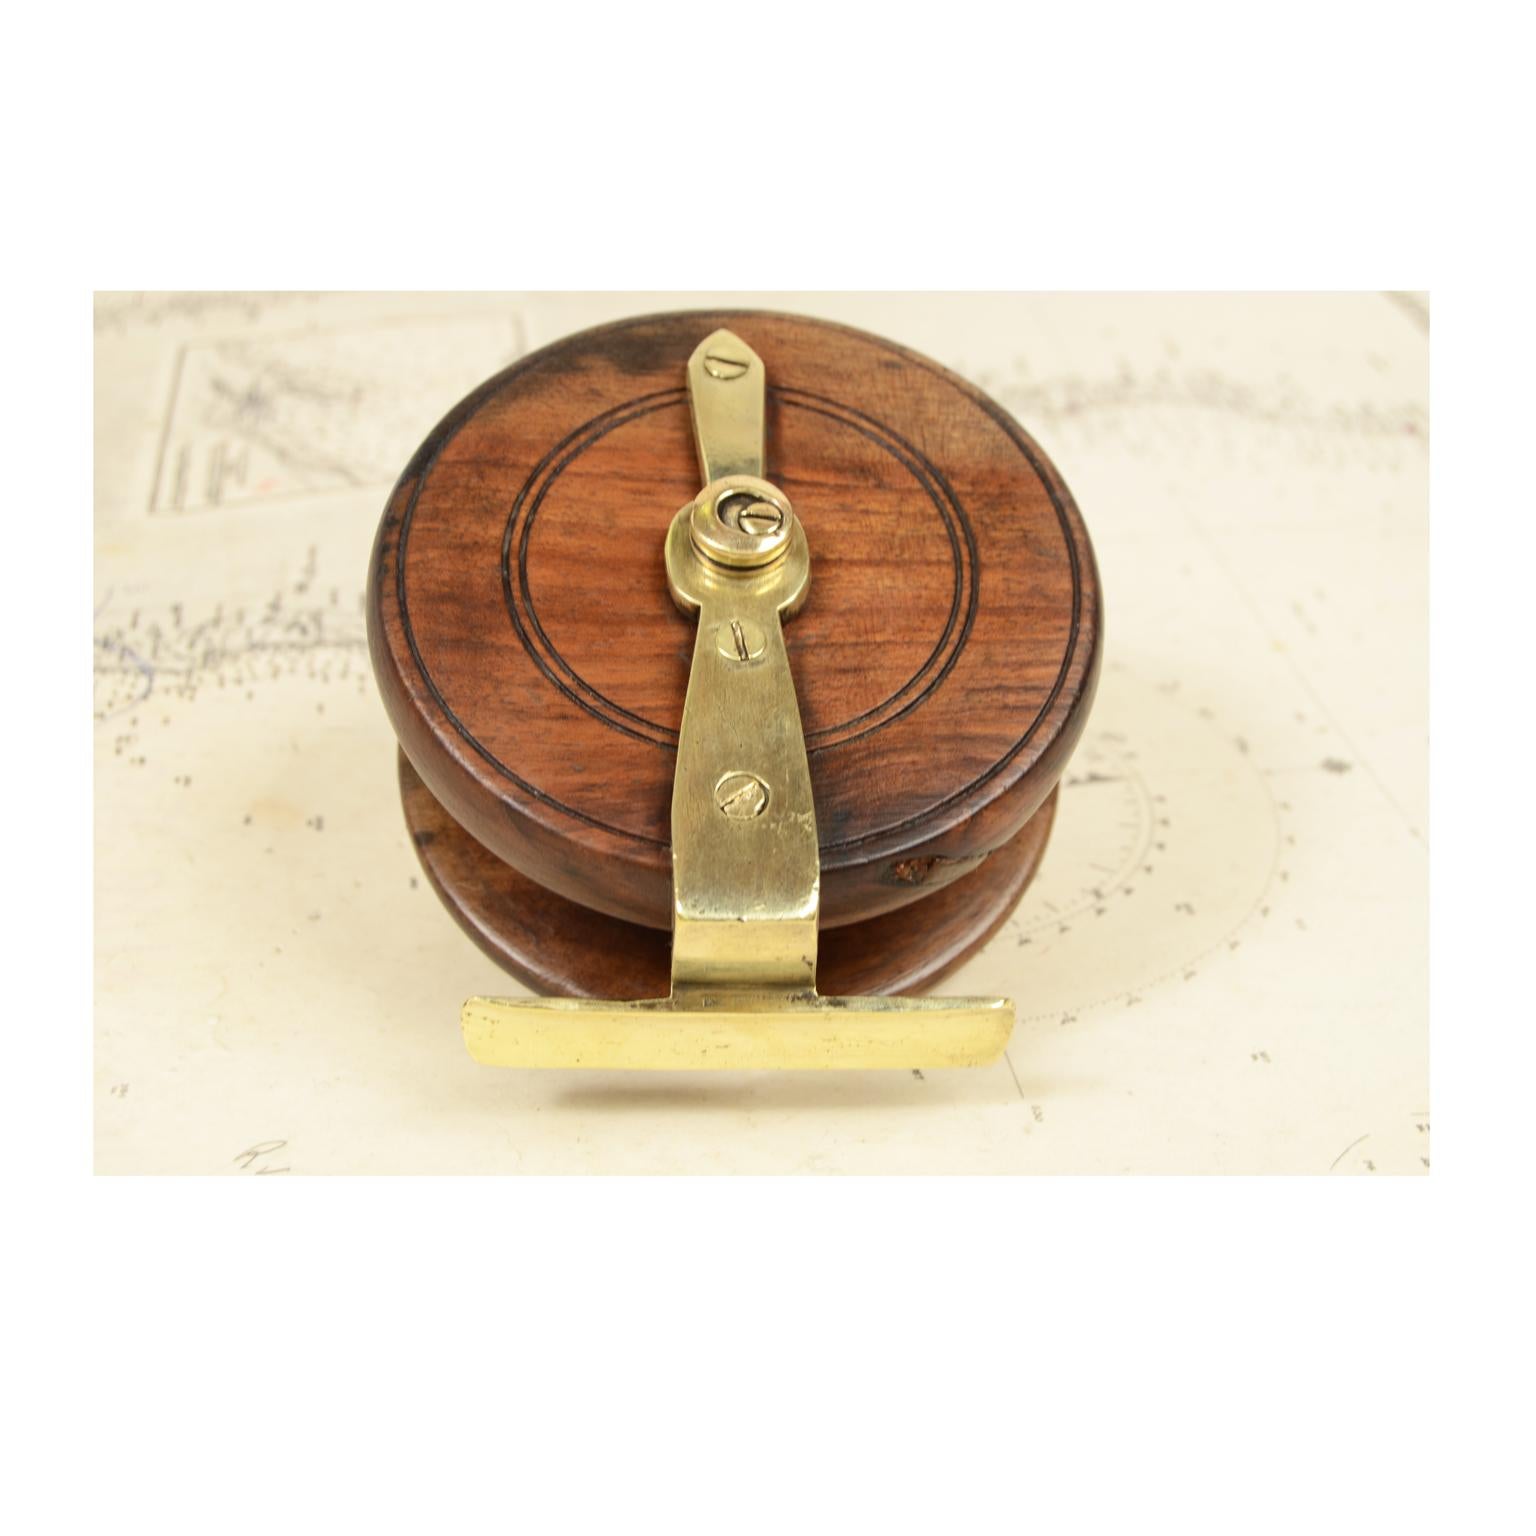 20th Century Antique Fishing Reel Made of Turned Oak and Brass, UK, Early 1900s